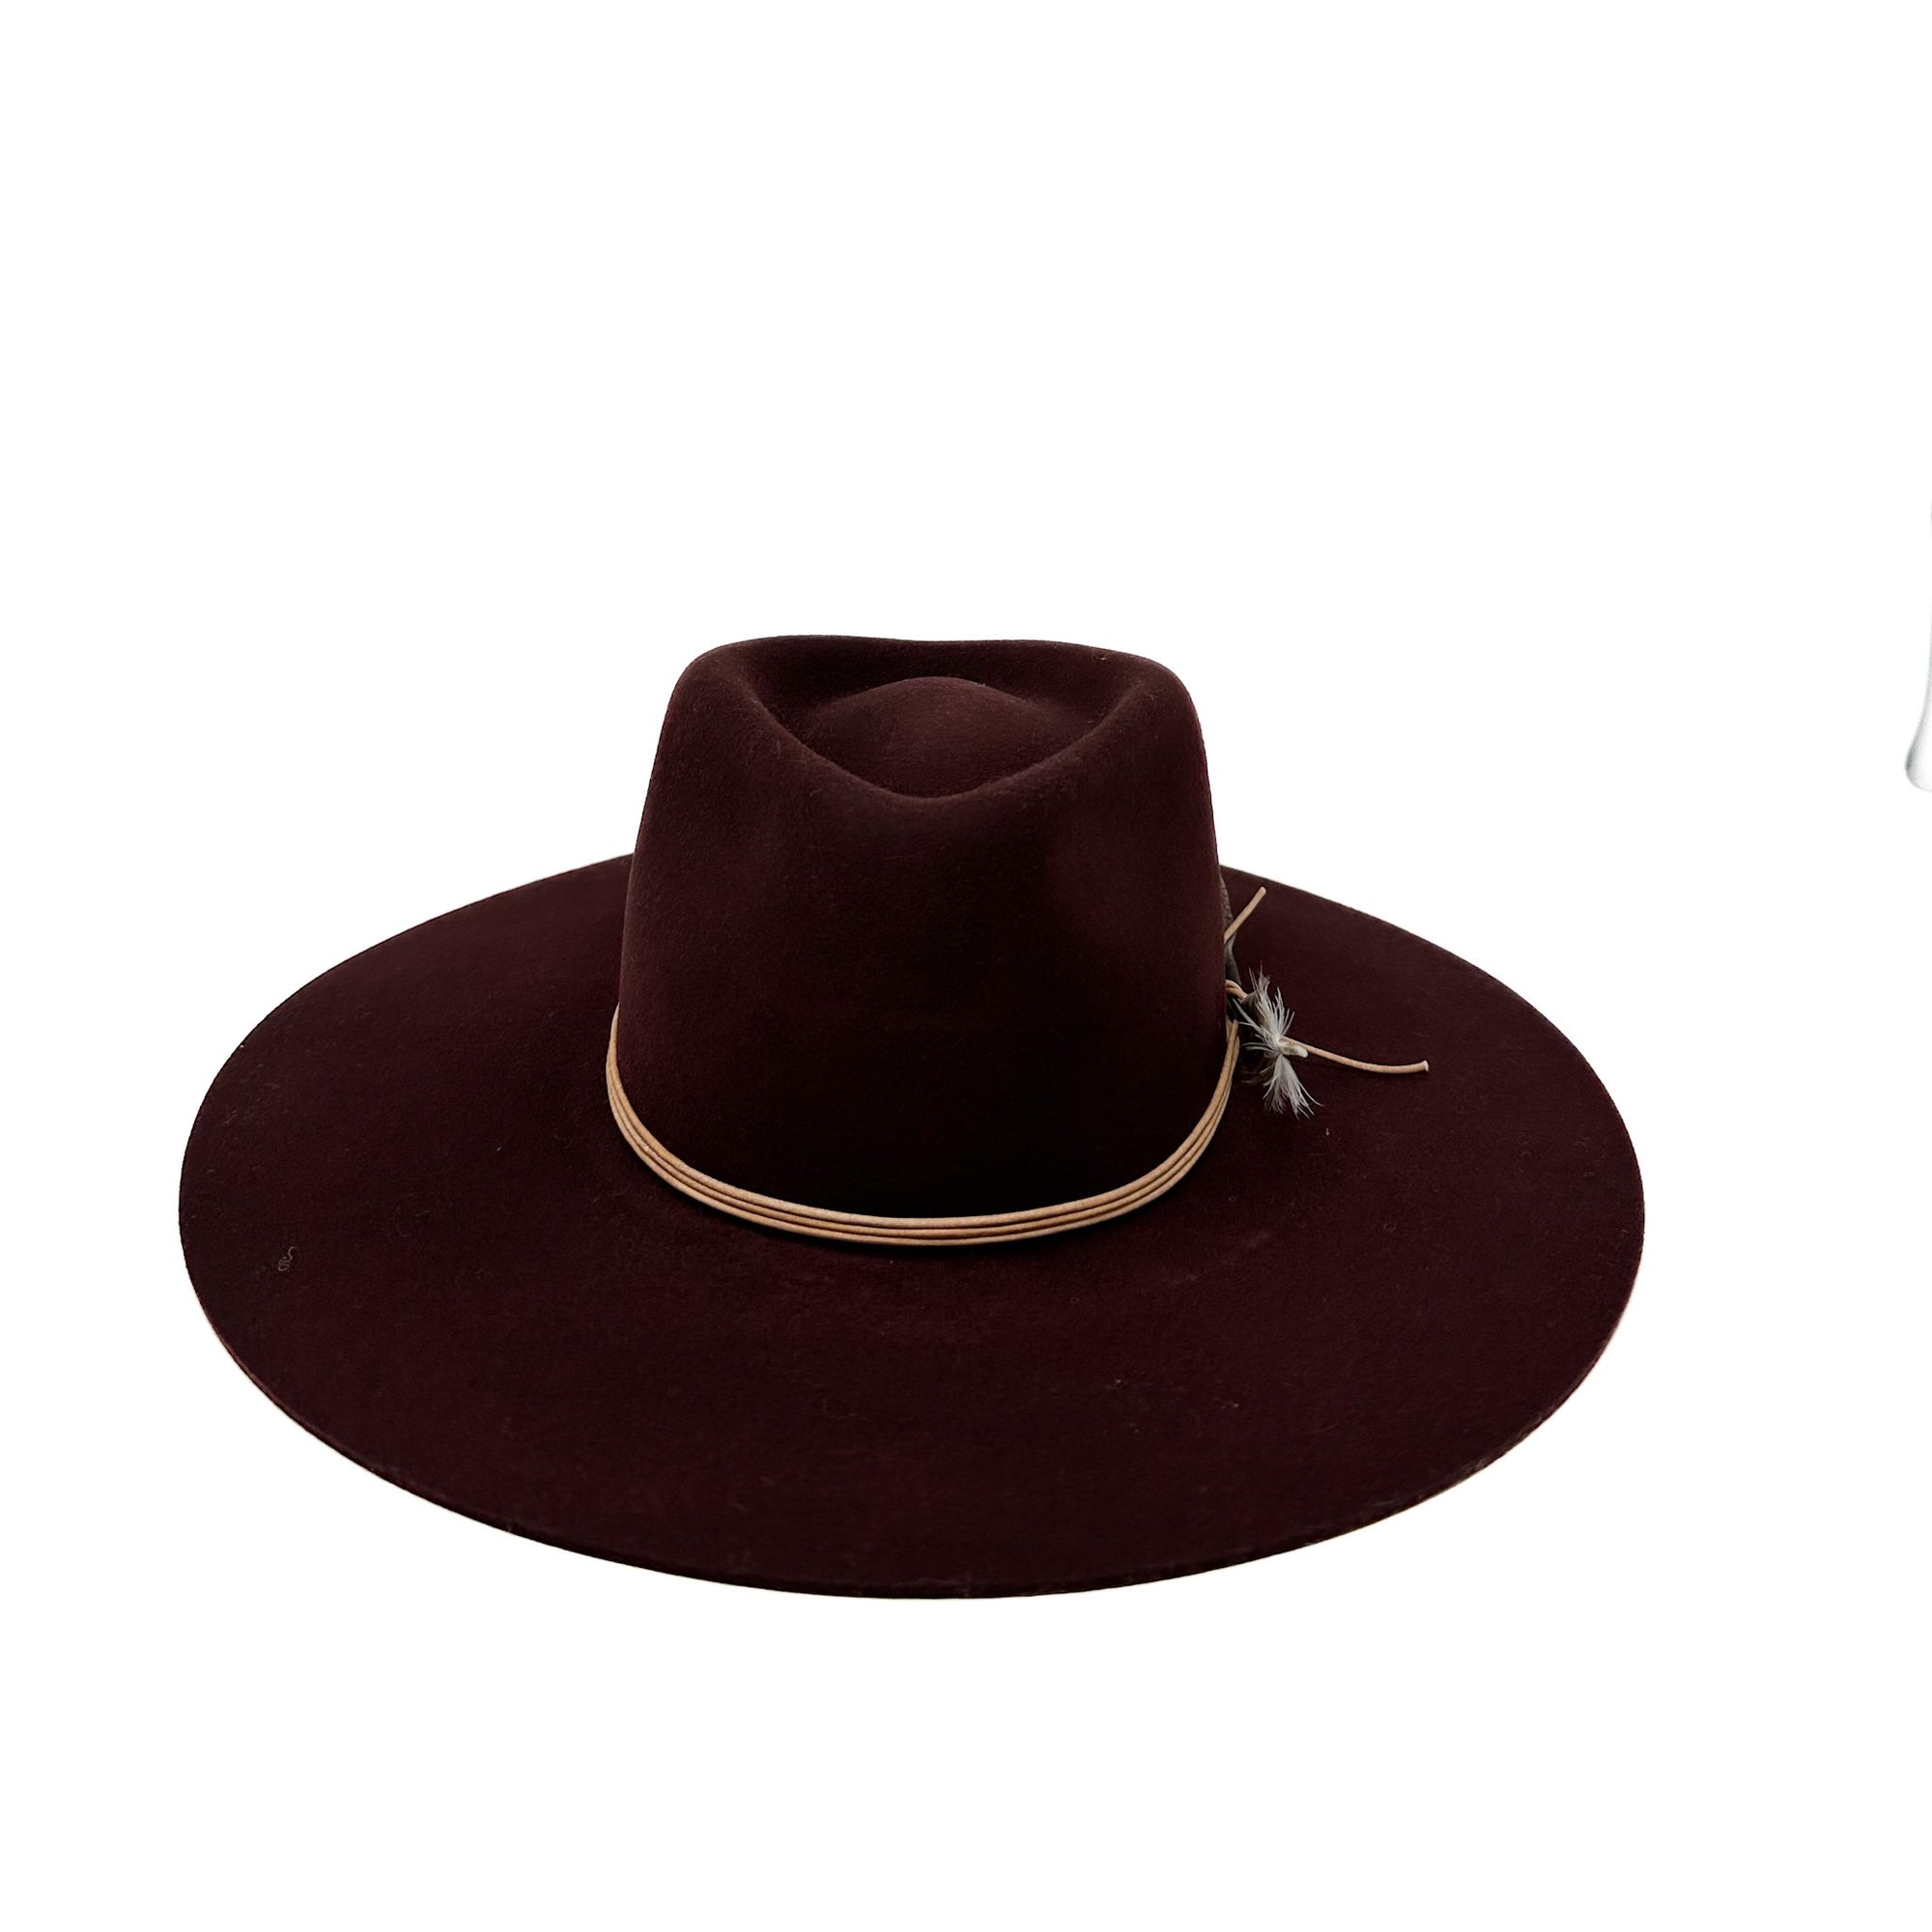 Montana fedora in burgundy with wrapped leather and feather